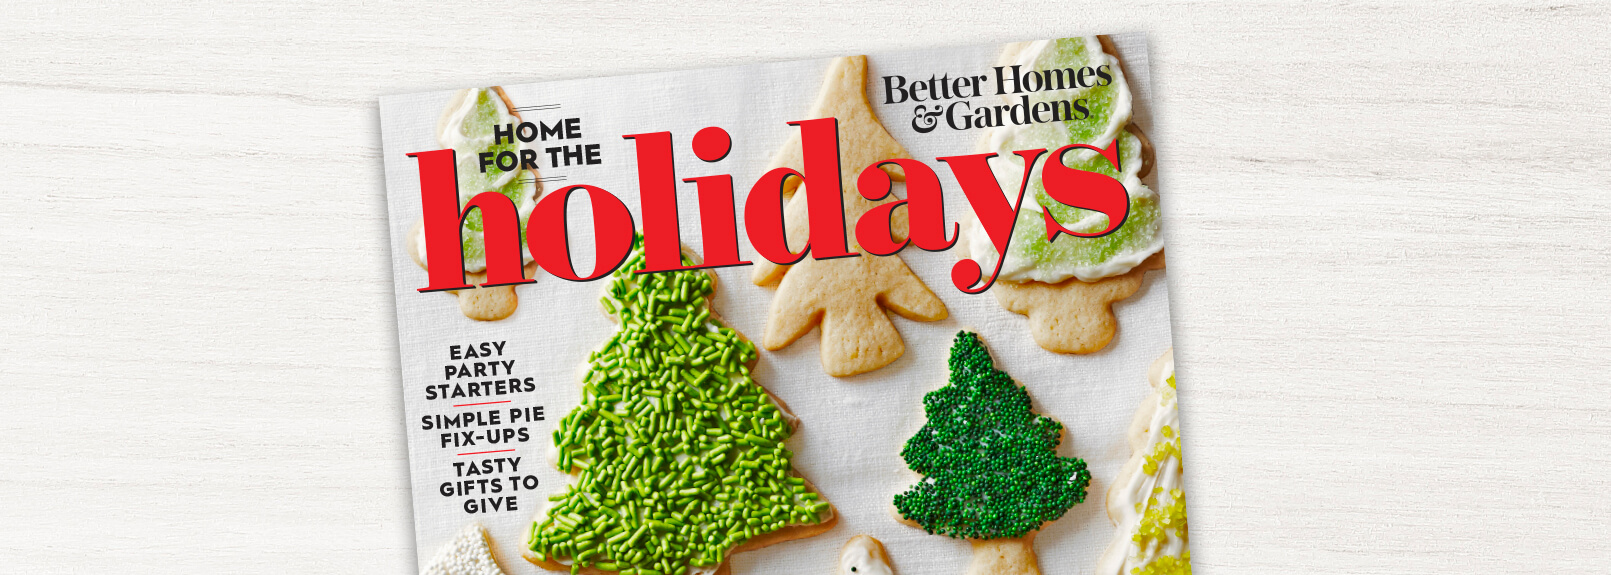 Better Homes And Gardens Home For The Holidays Sweepstakes 2019